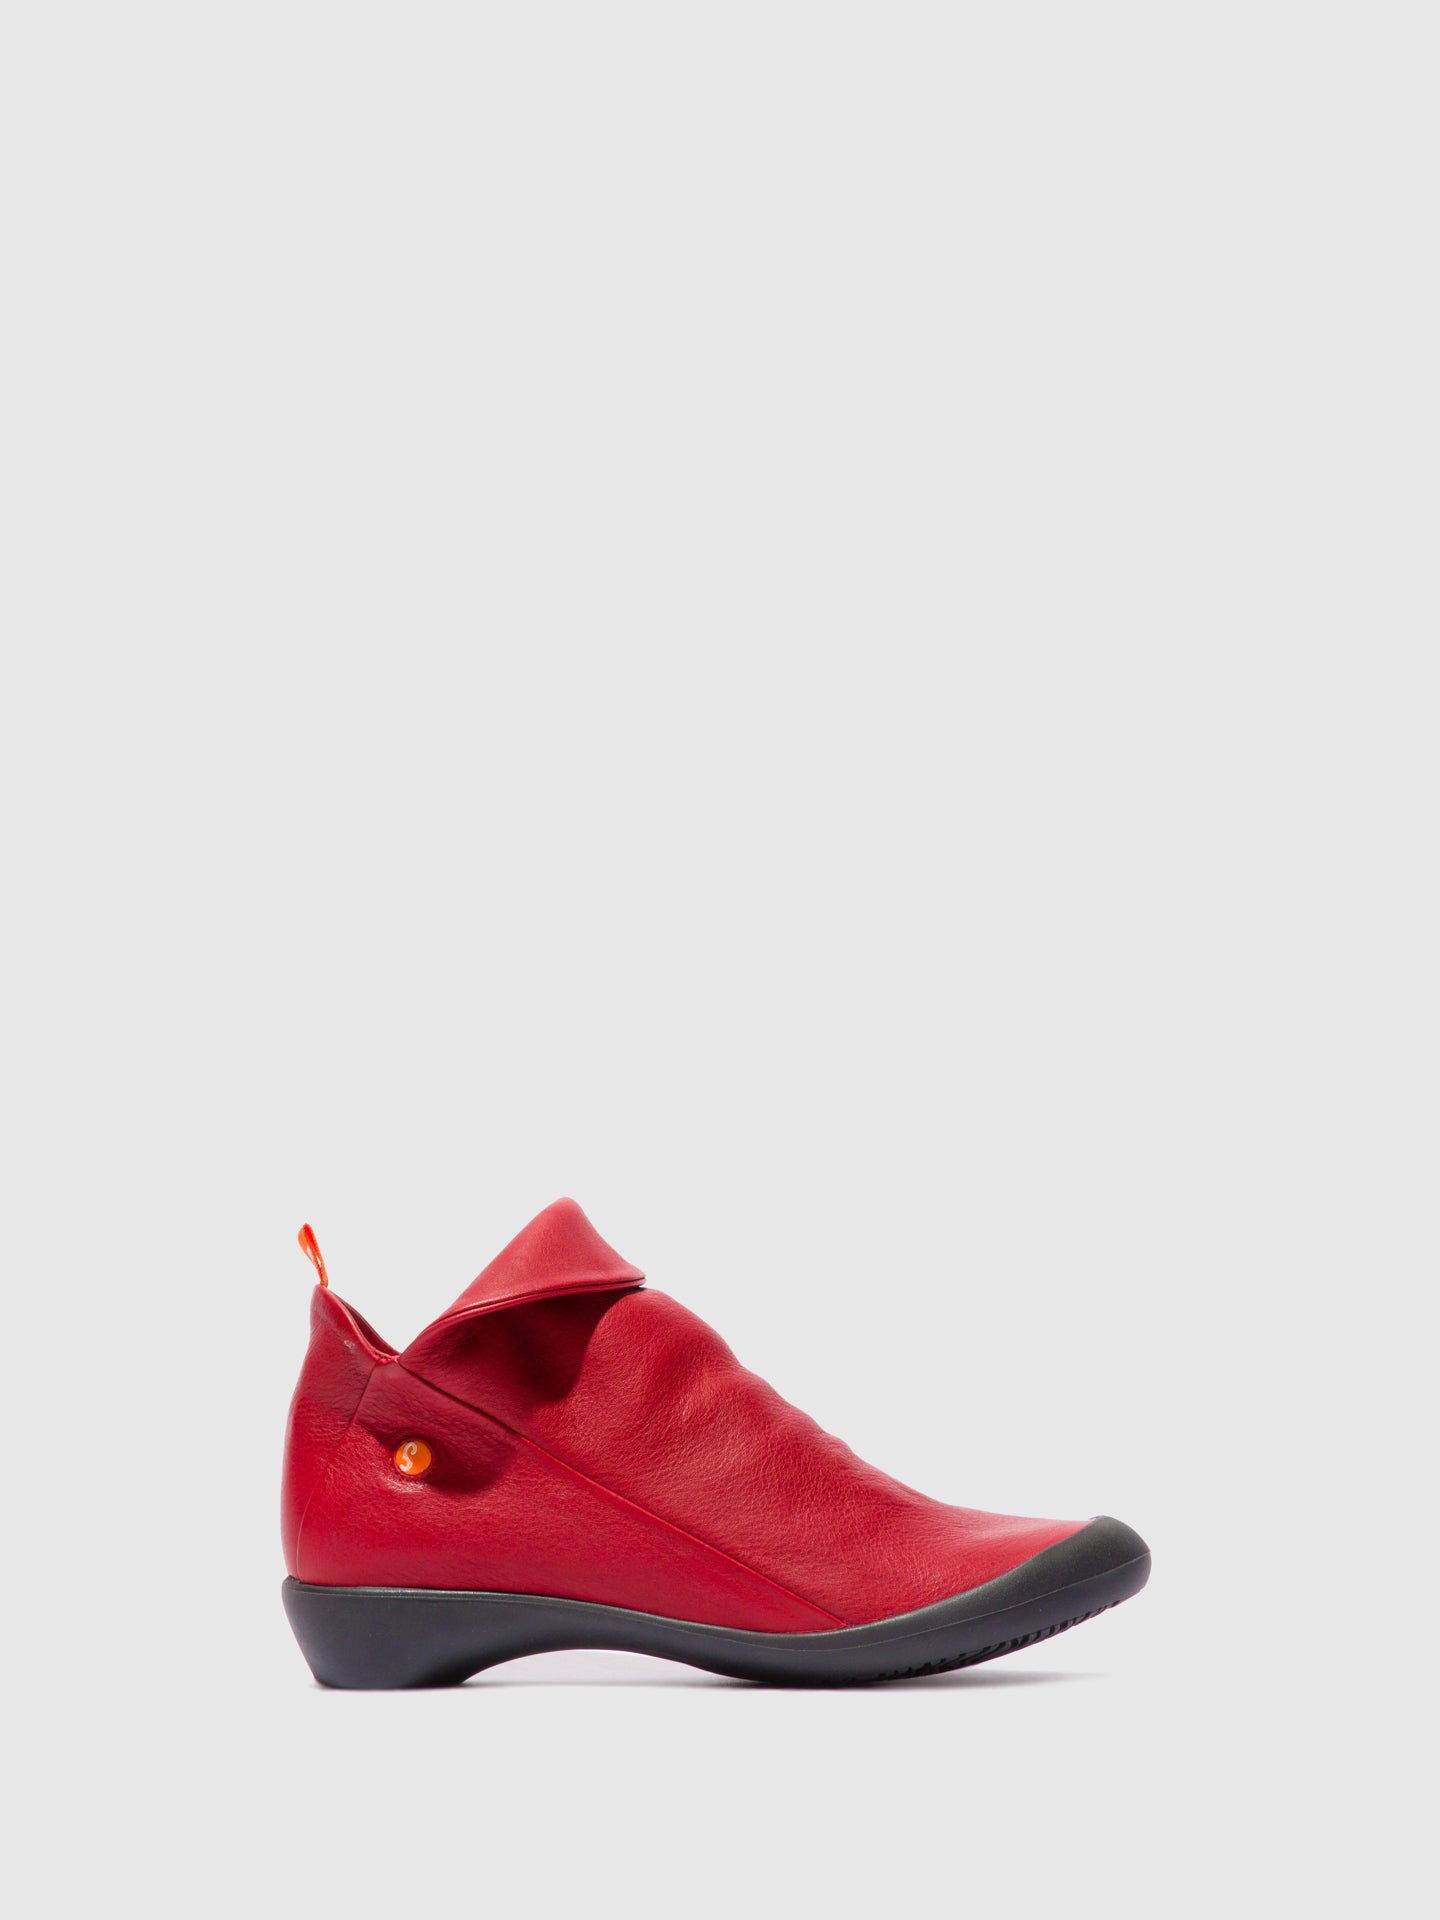 Softinos Zip Up Ankle Boots FARAH RED